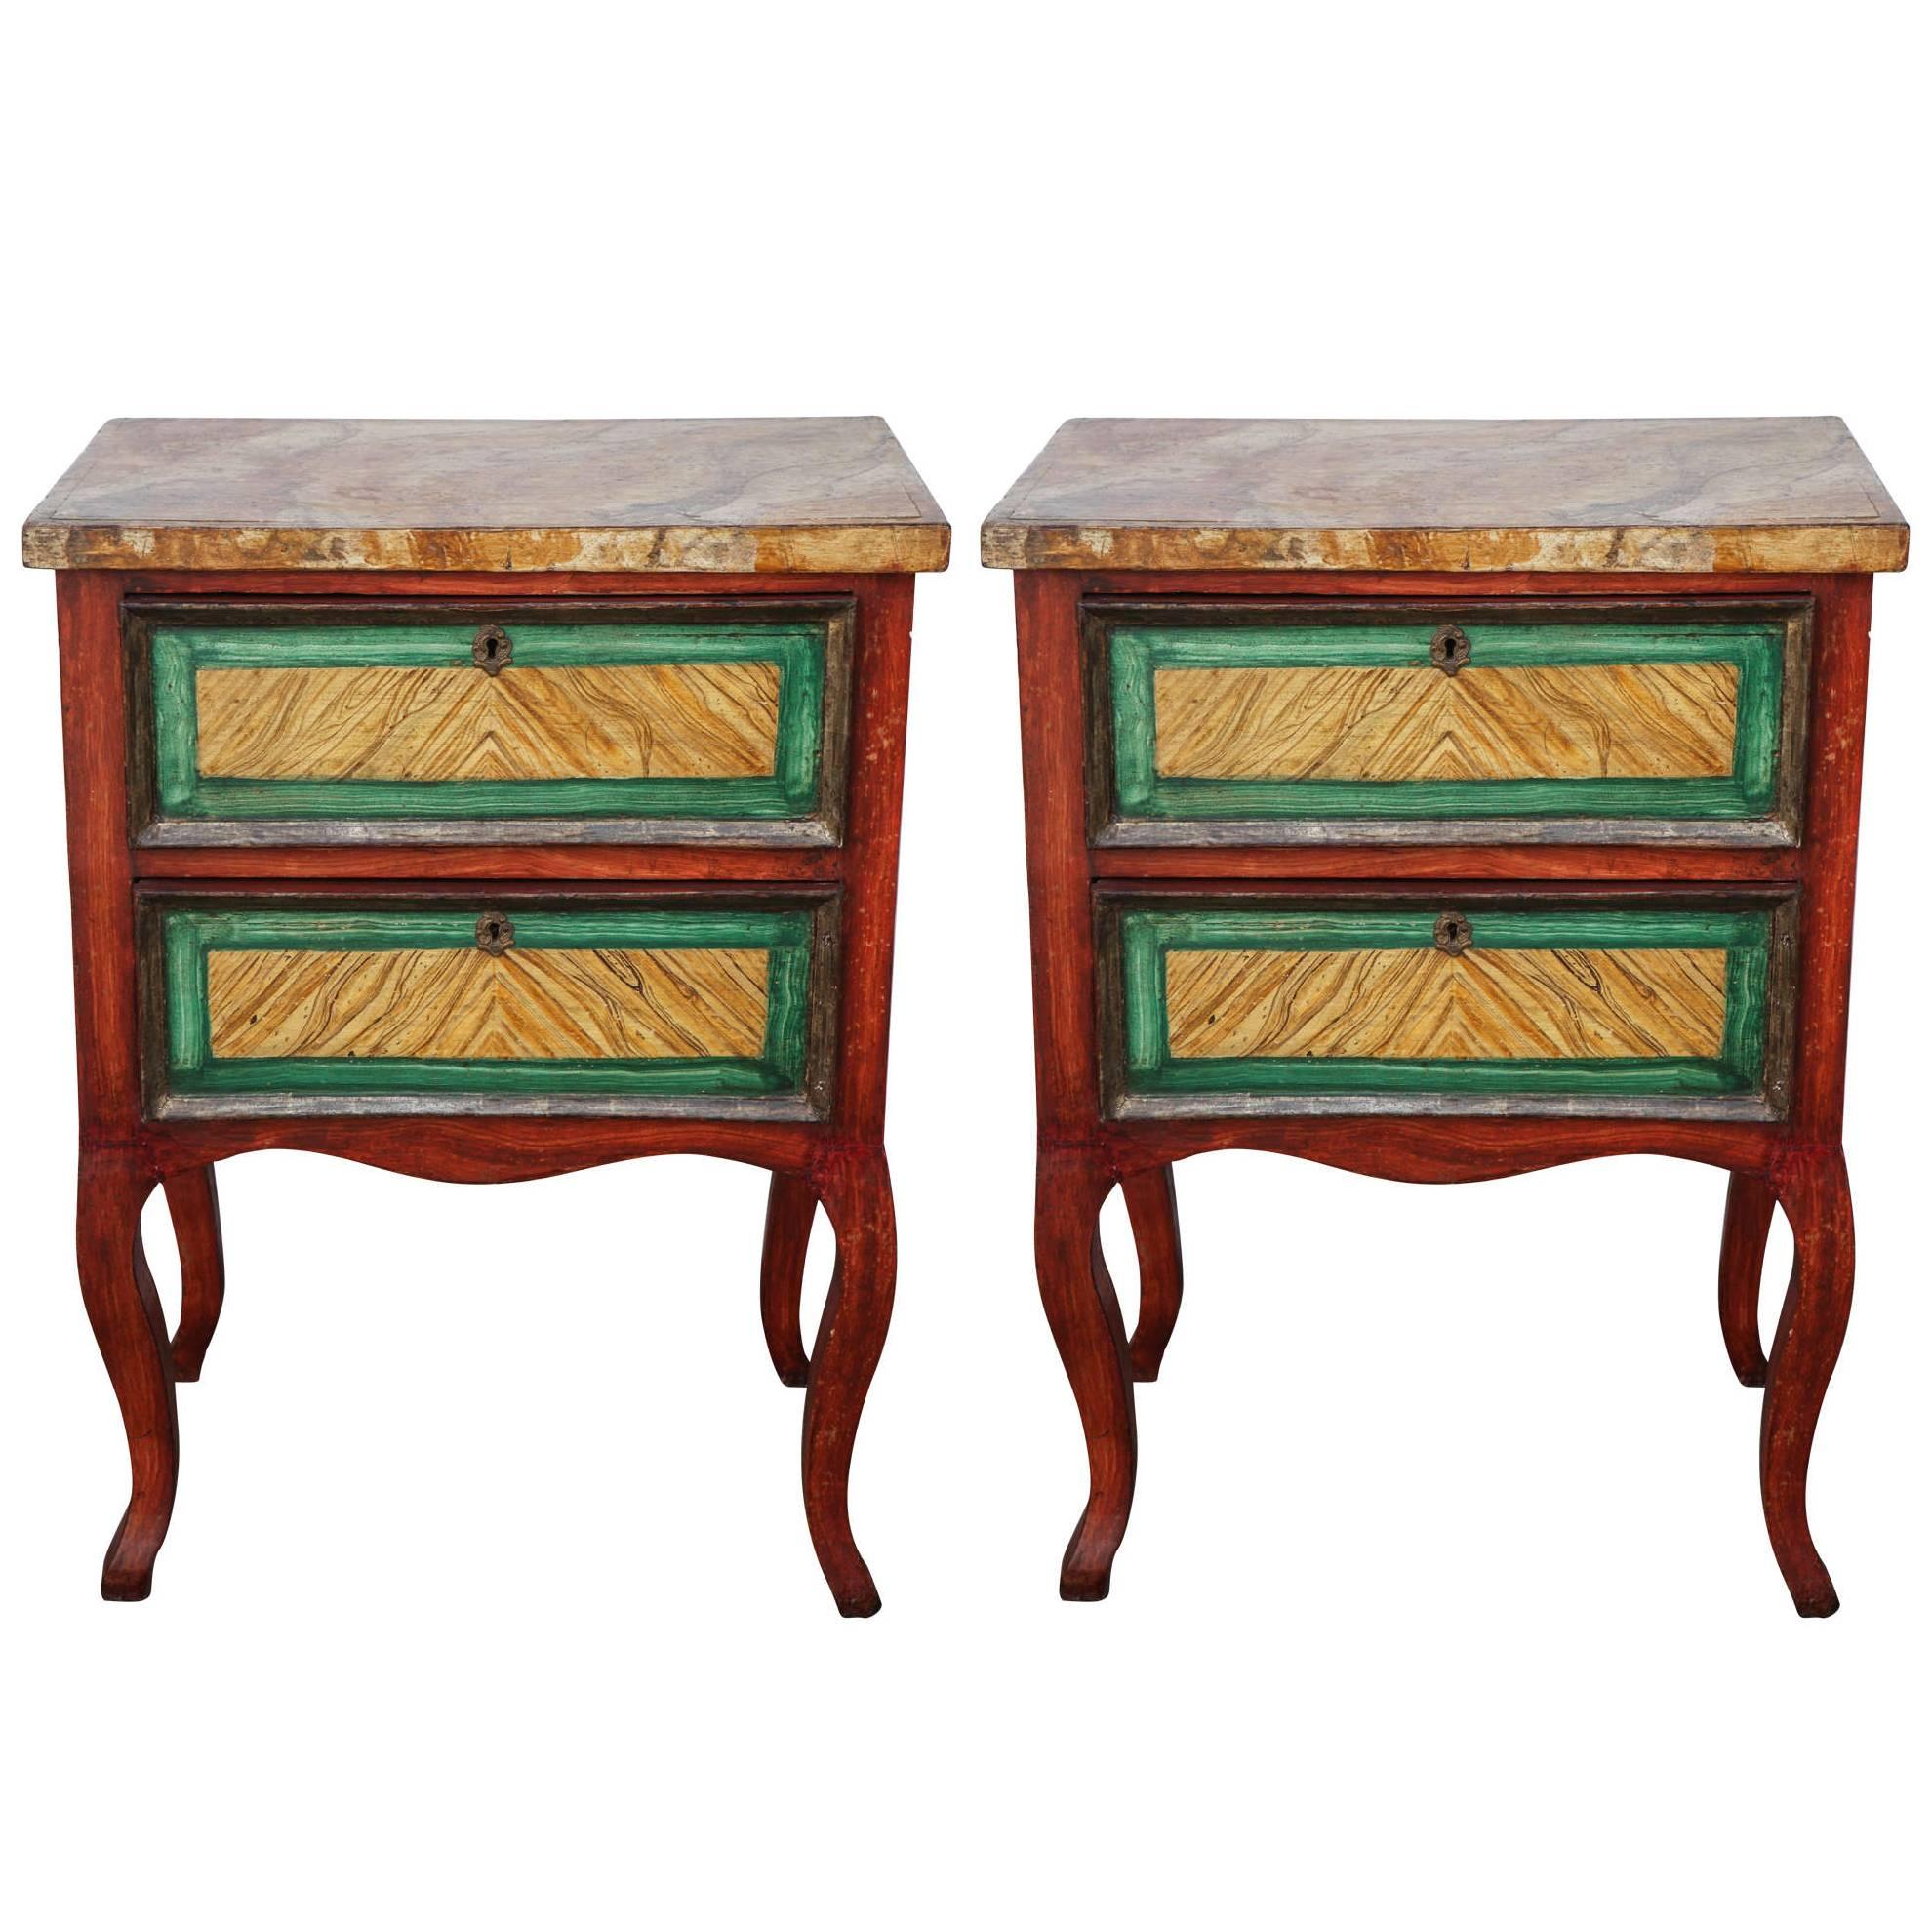 Pair of 19th Century Italian Miniature Painted Commodes